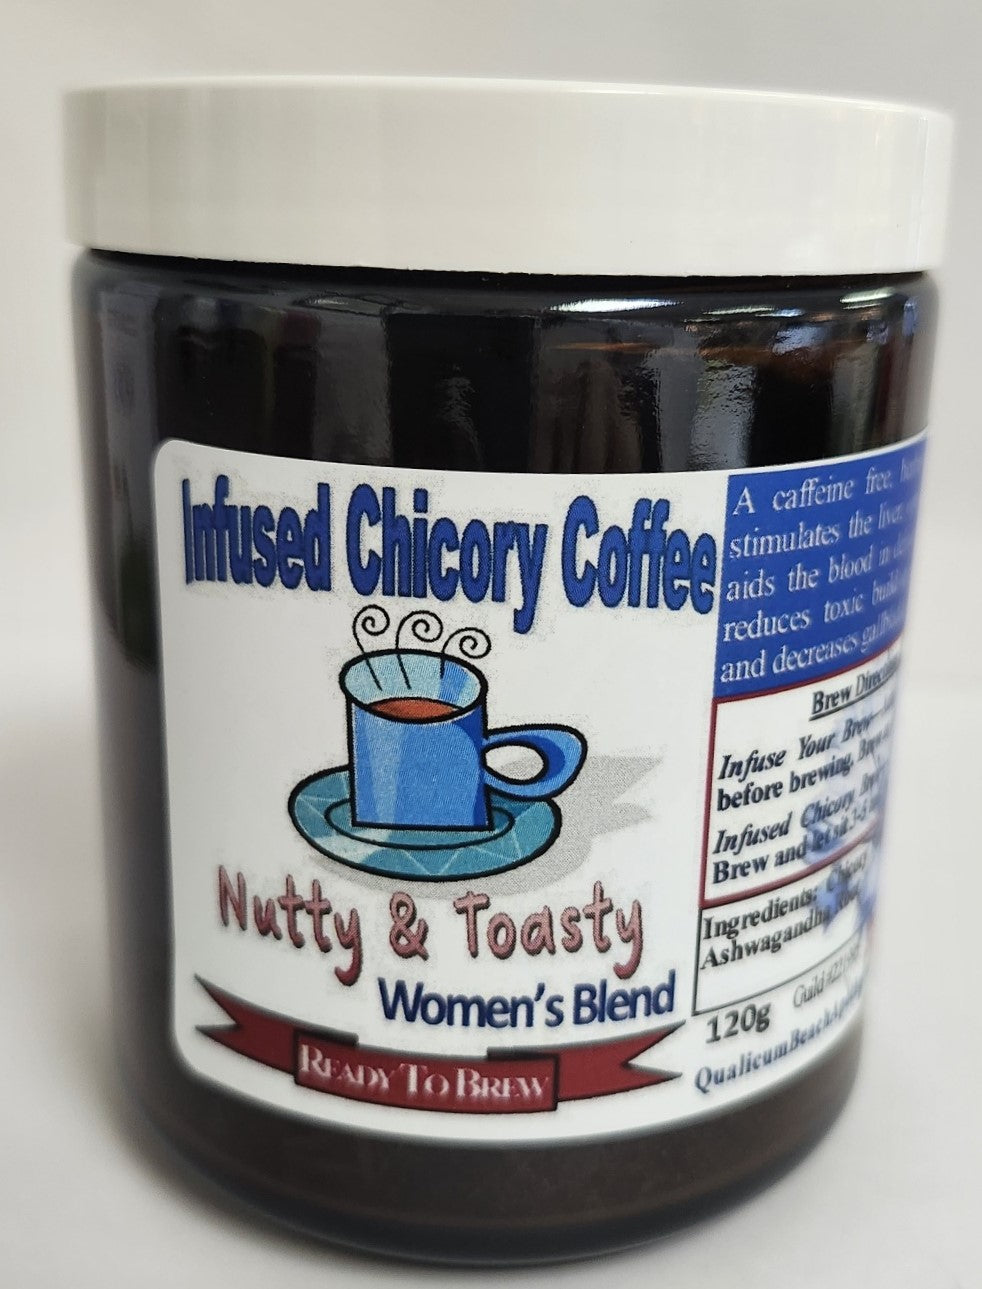 Organic Remedy, Herbal-Infused Chicory Coffee-Women's Blend